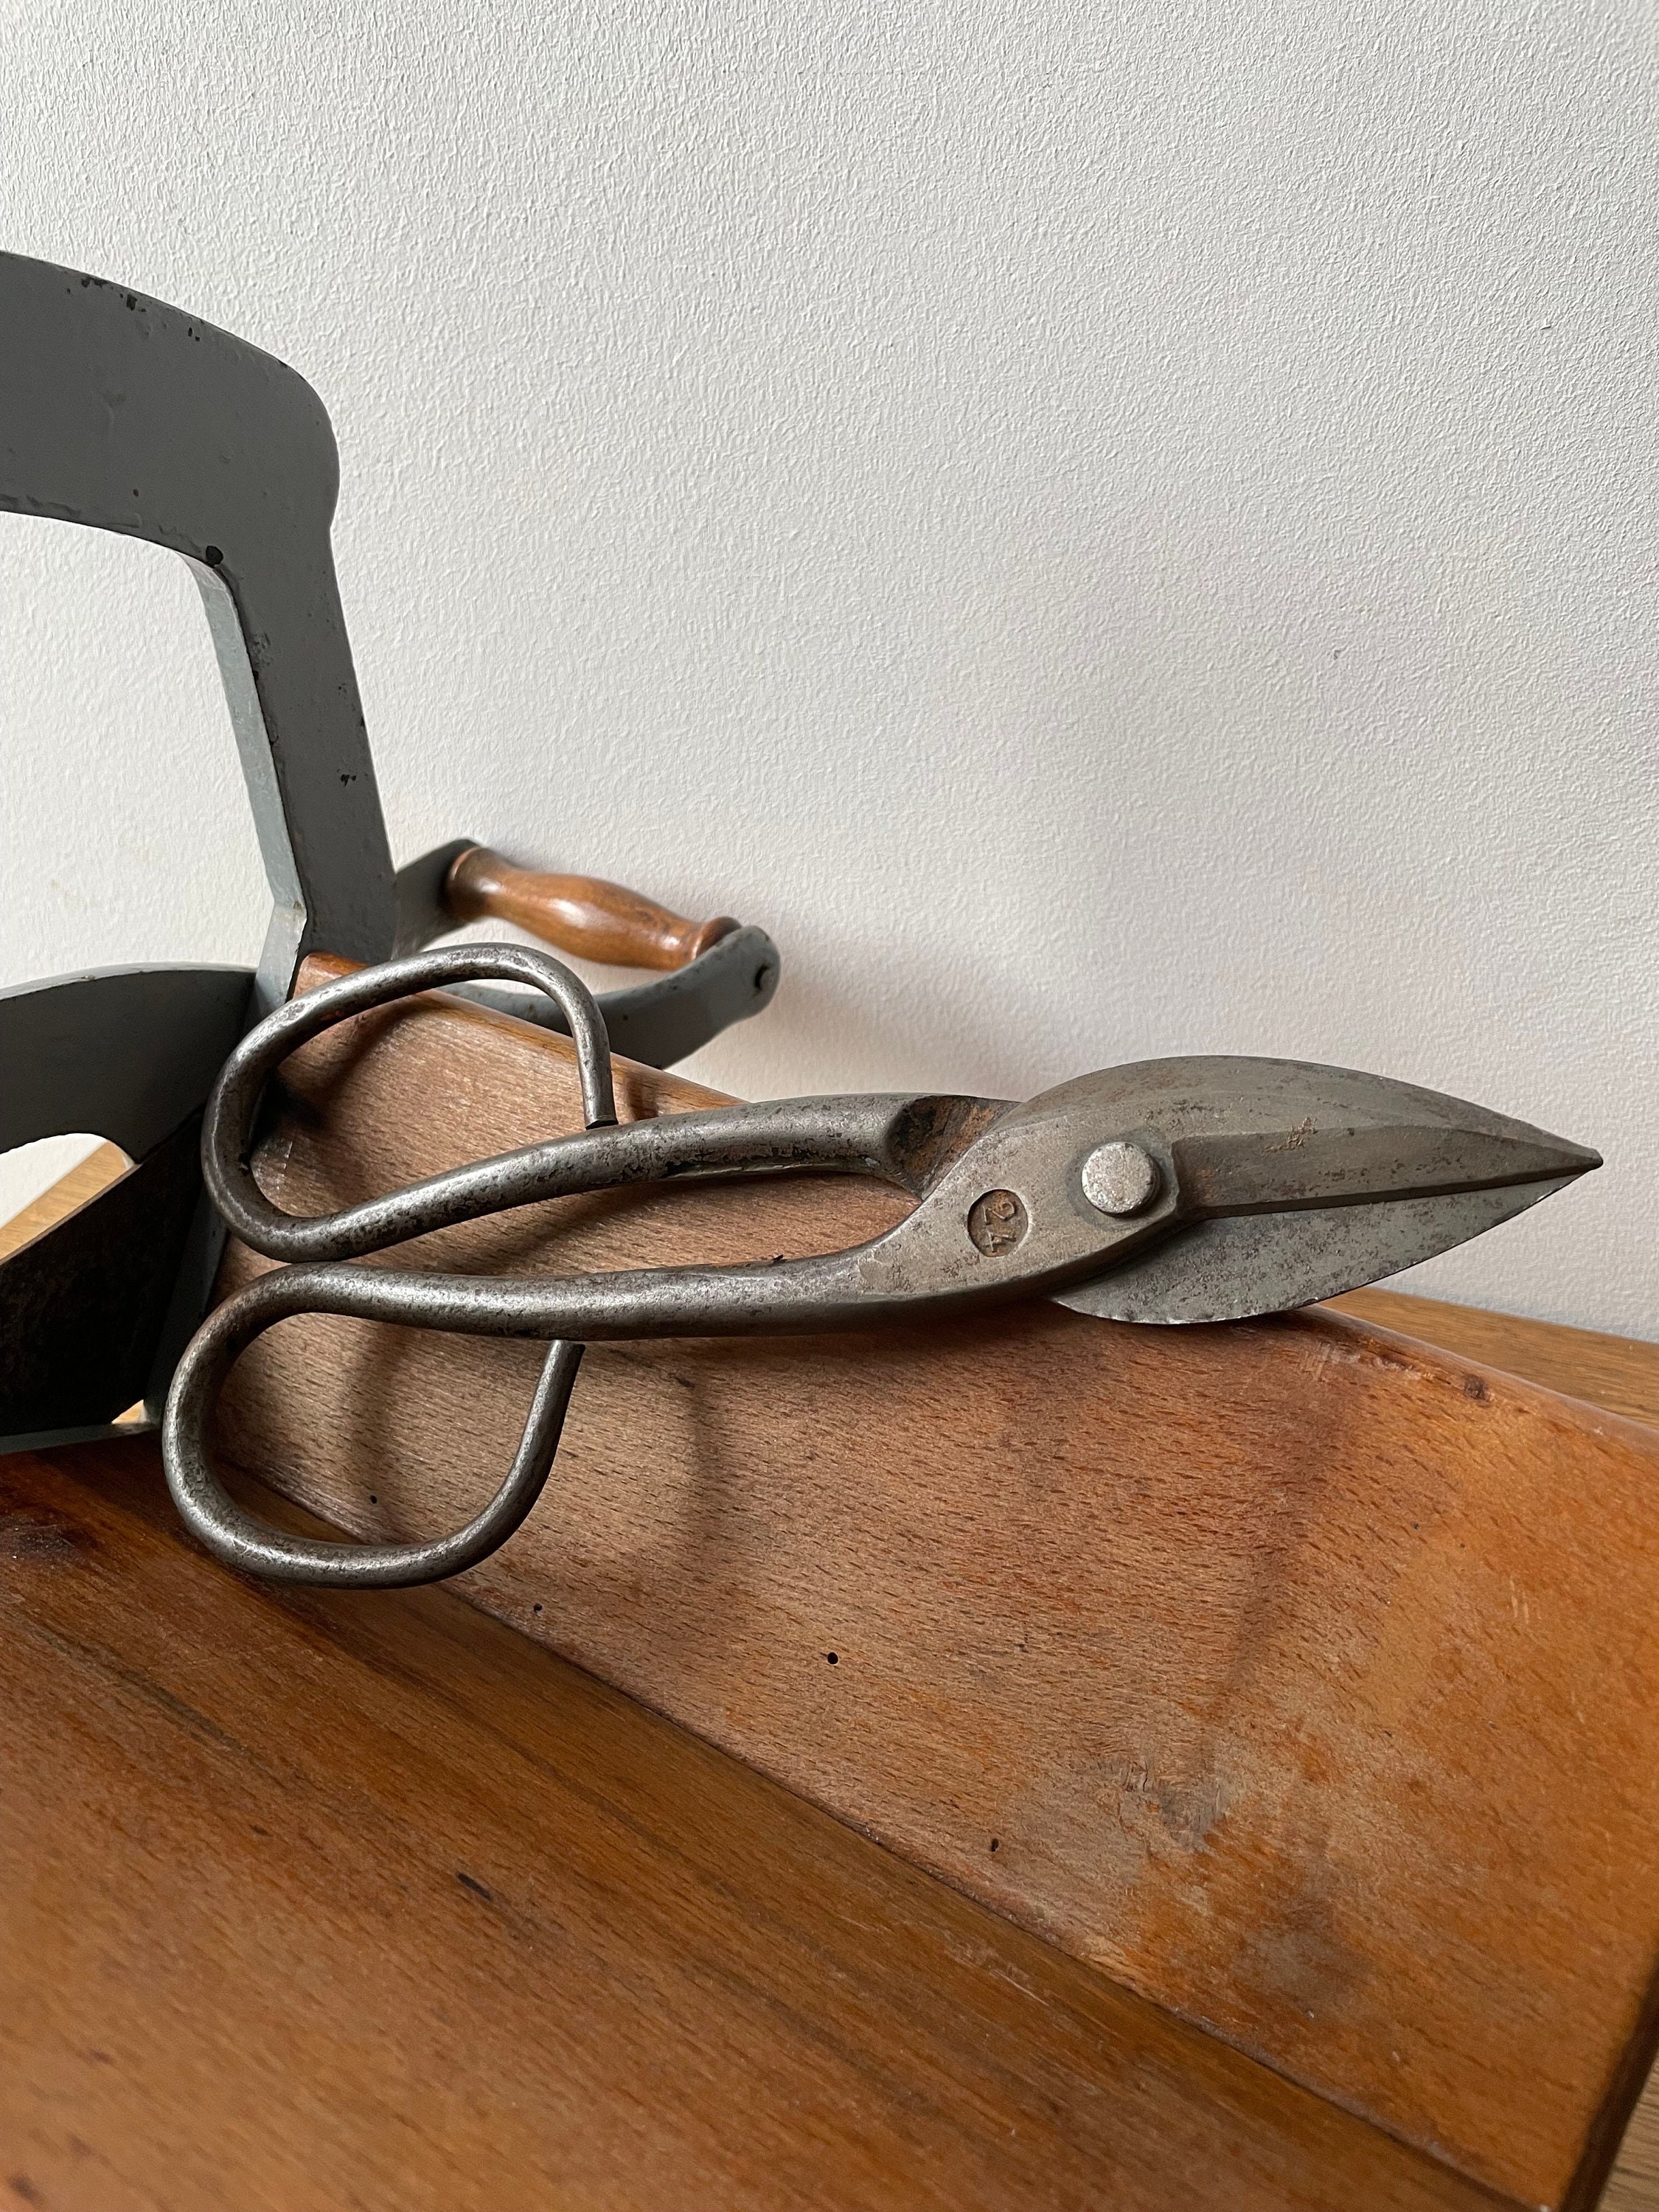 Vintage Pair of Carpet or Upholsterer's Industrial Shears by Wiss